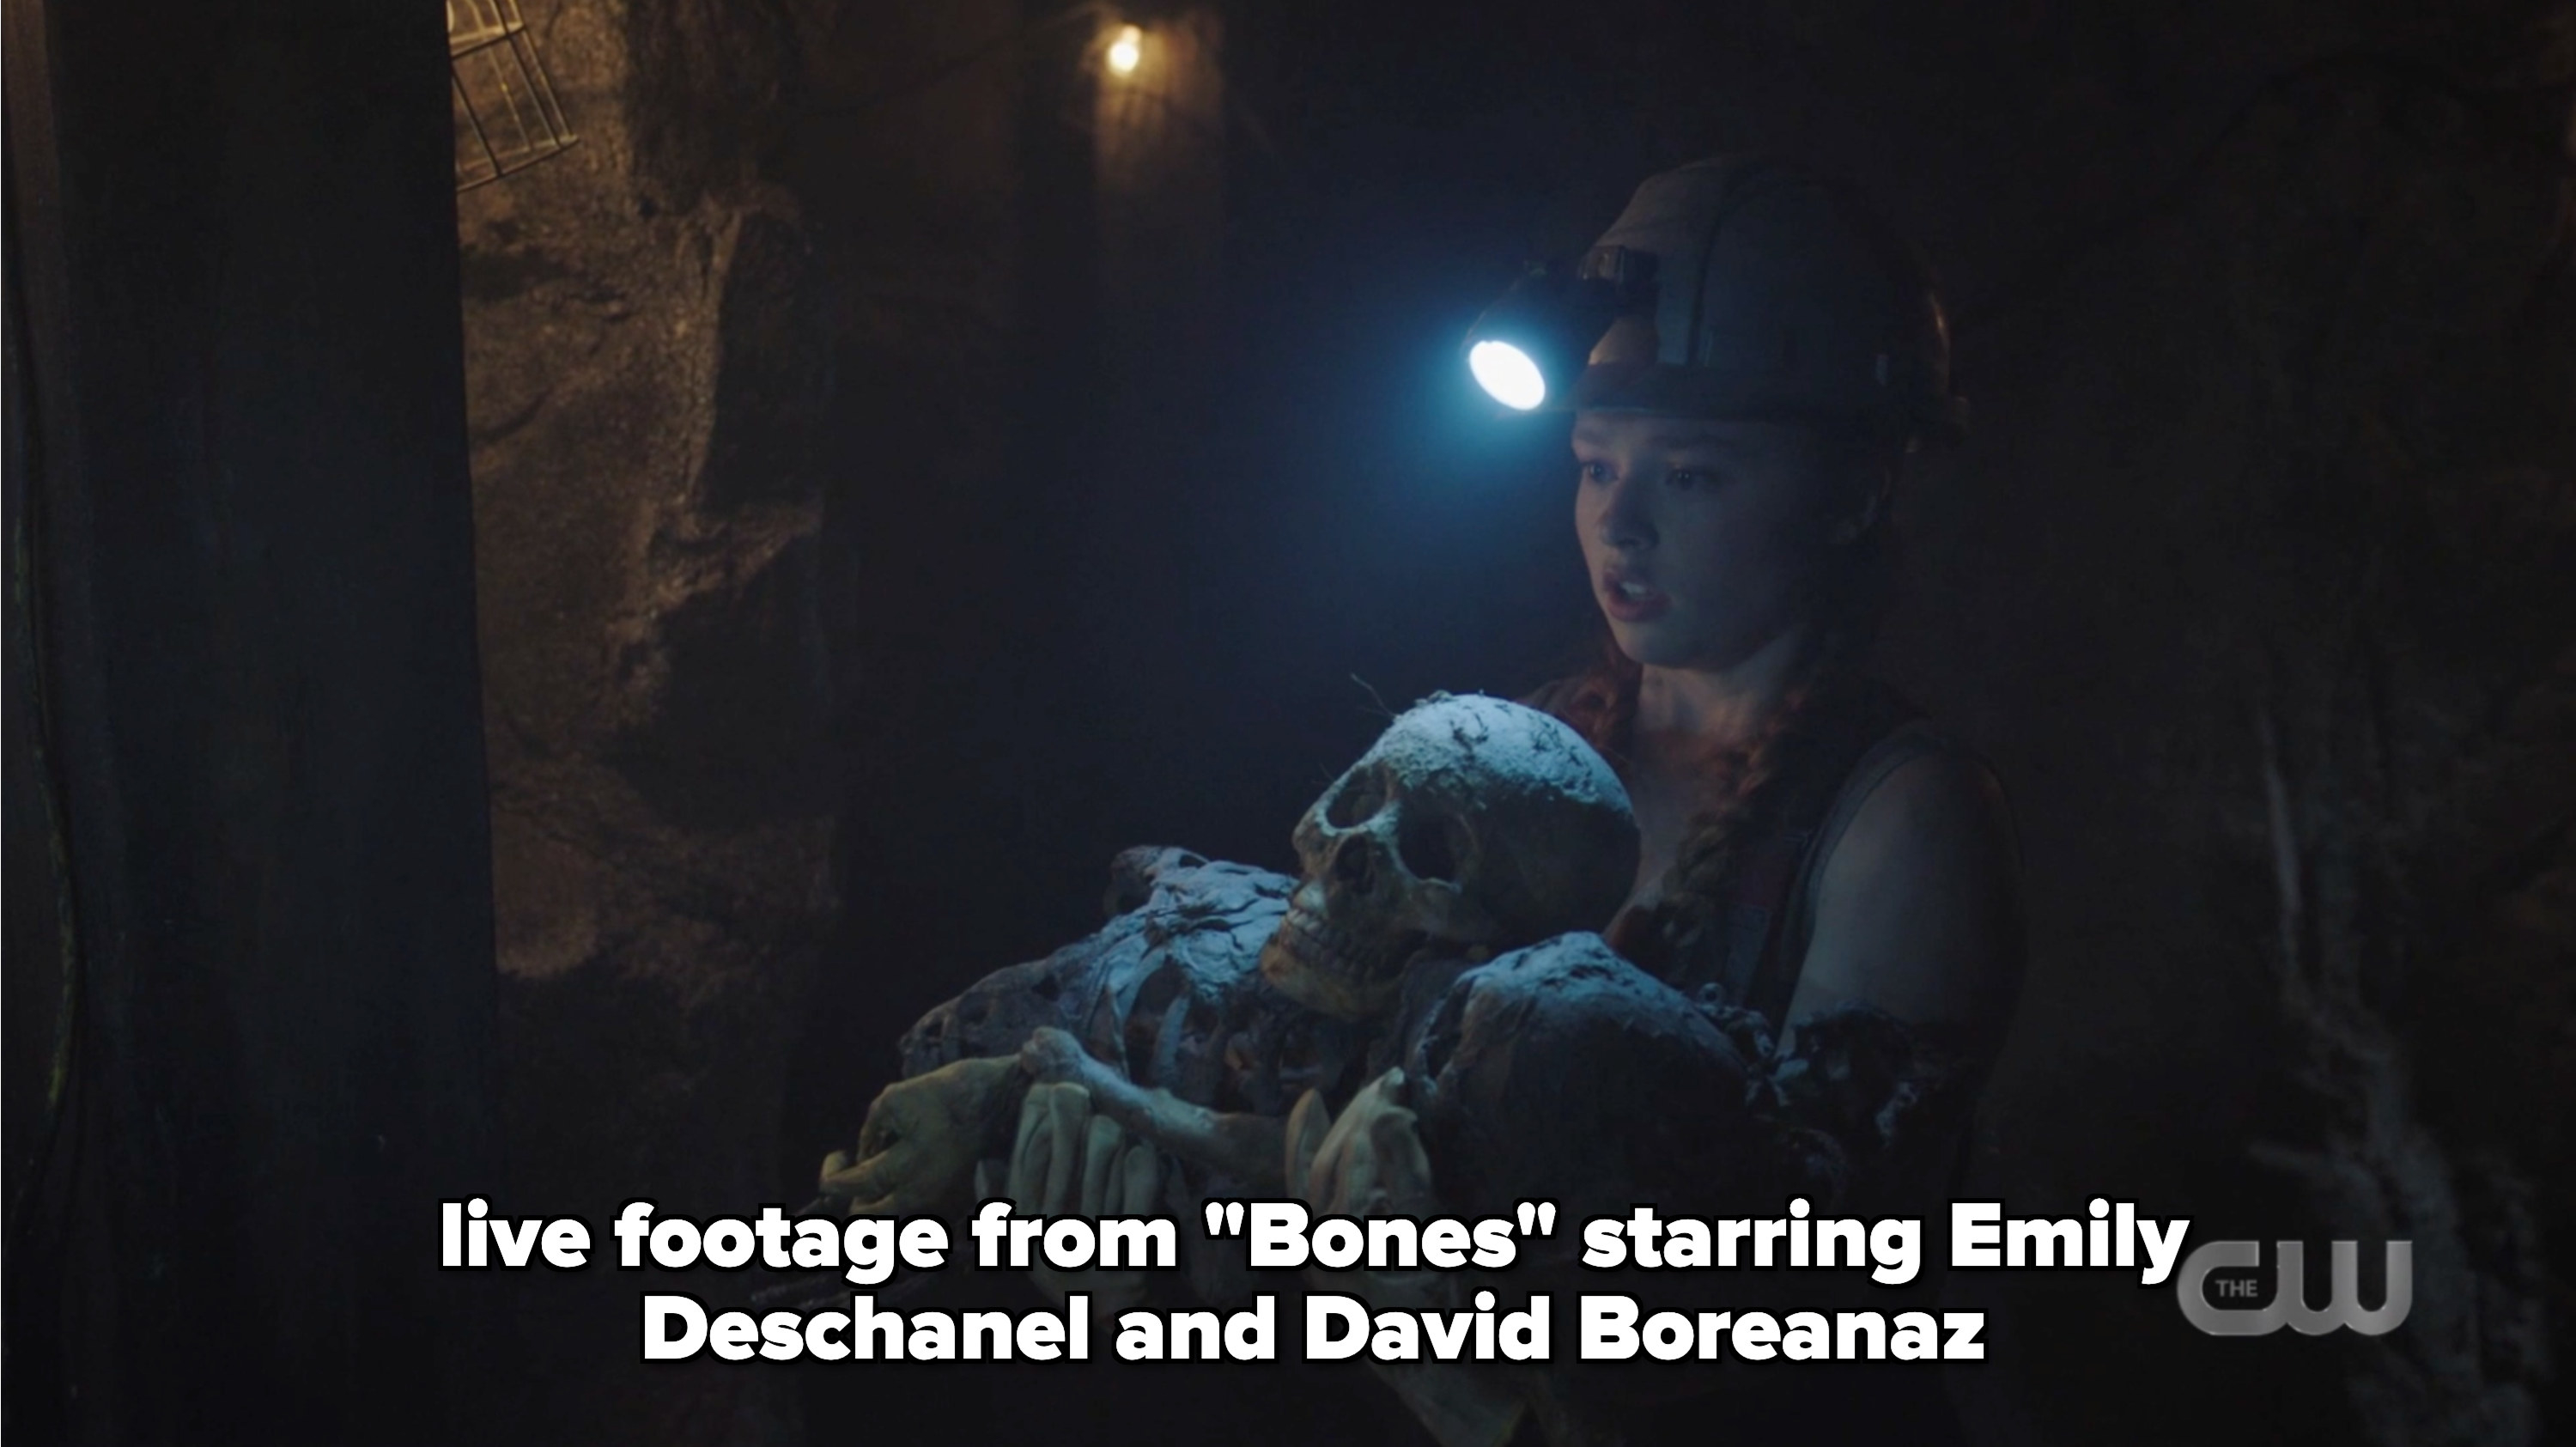 Britta with the bones with a joke about the show bones starring emily deschanel and David Boreanaz